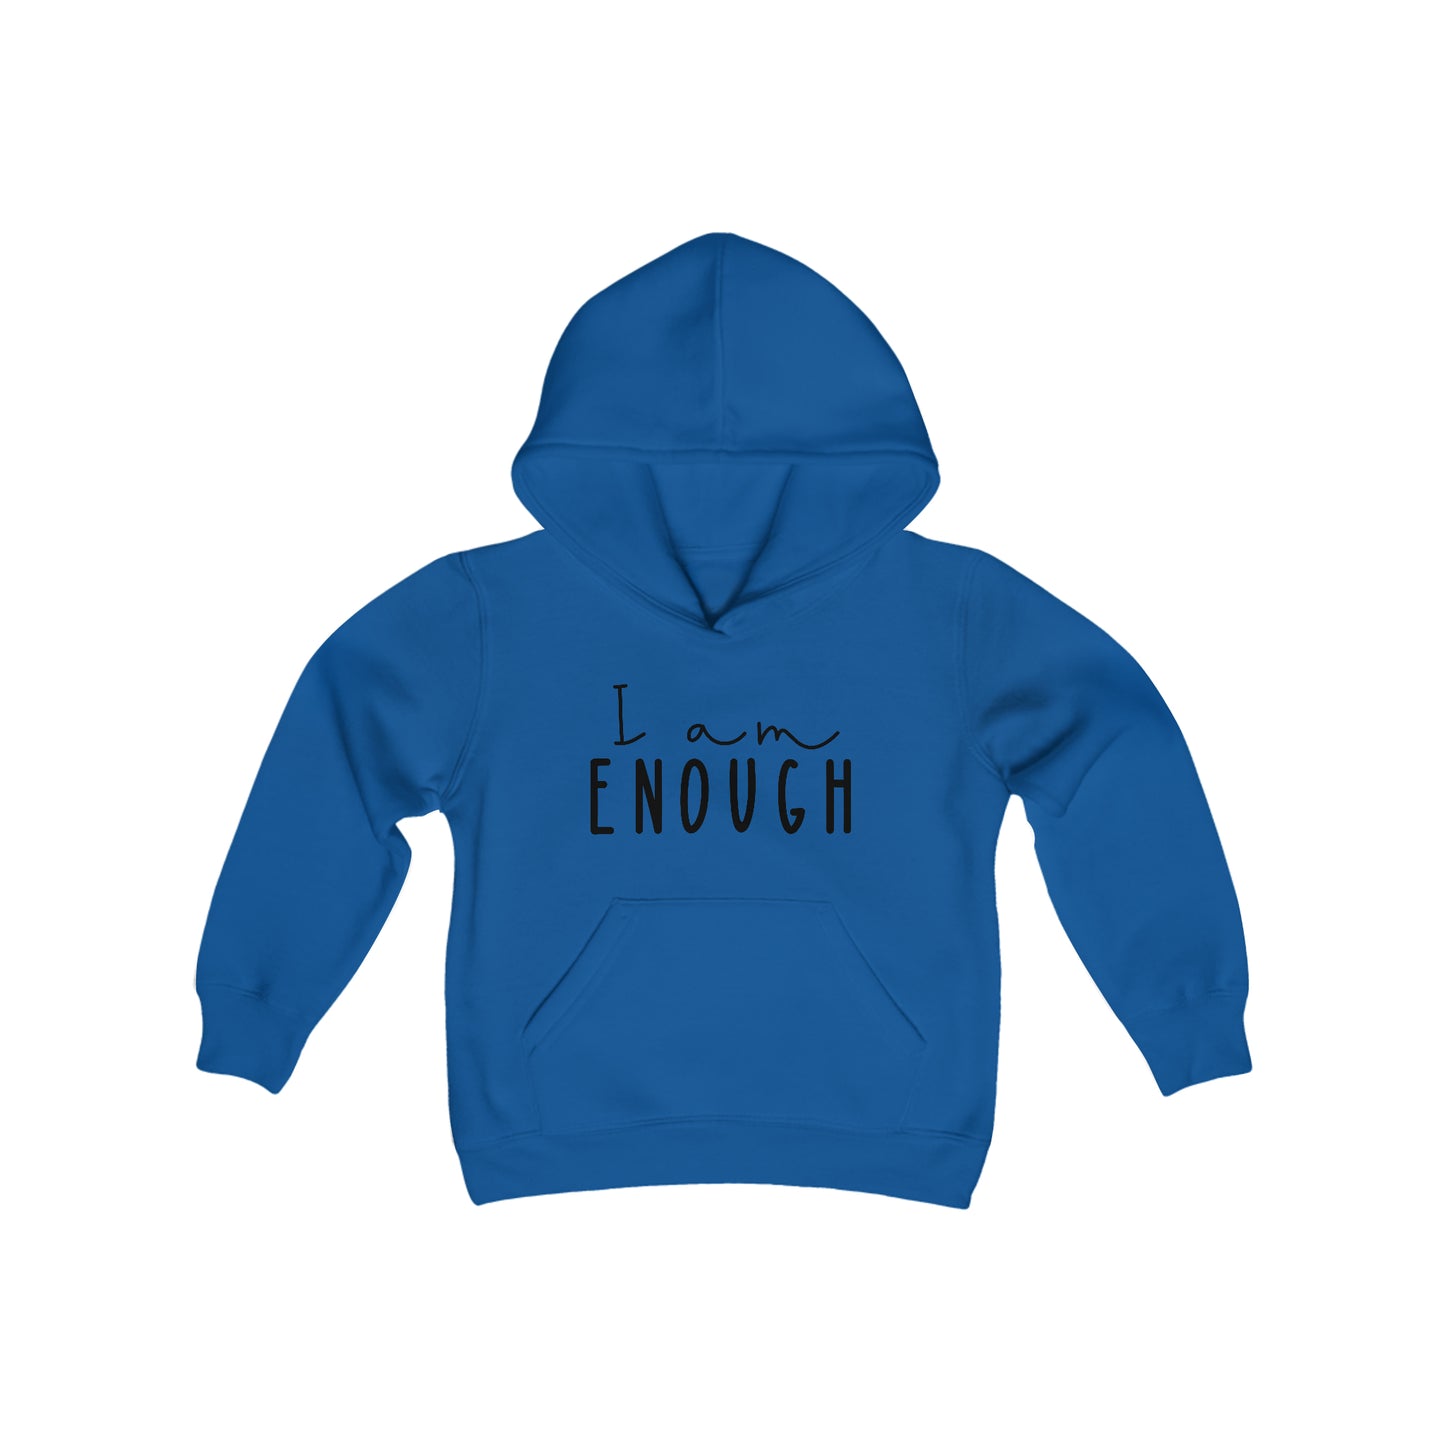 I am ENOUGH - Inspiration - Self Love - Self Acceptance - Youth Heavy Blend Hooded Sweatshirt